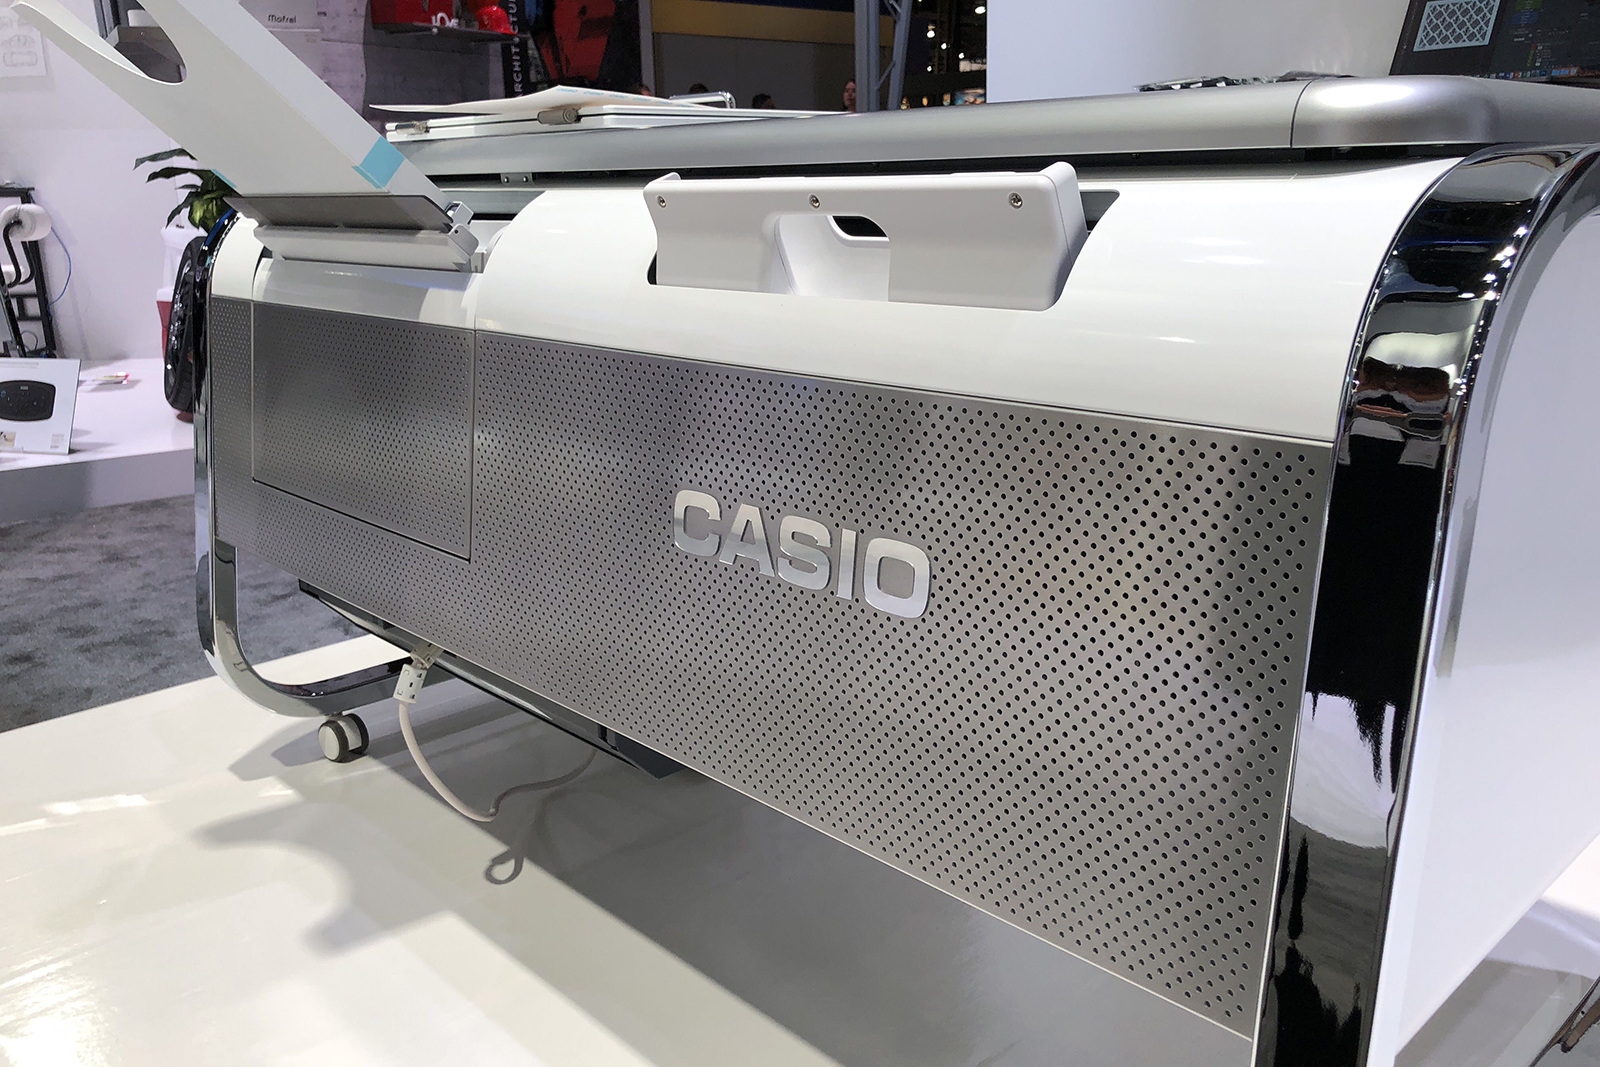 casio mofrel 25d printer ces2018 image uploaded from ios 8